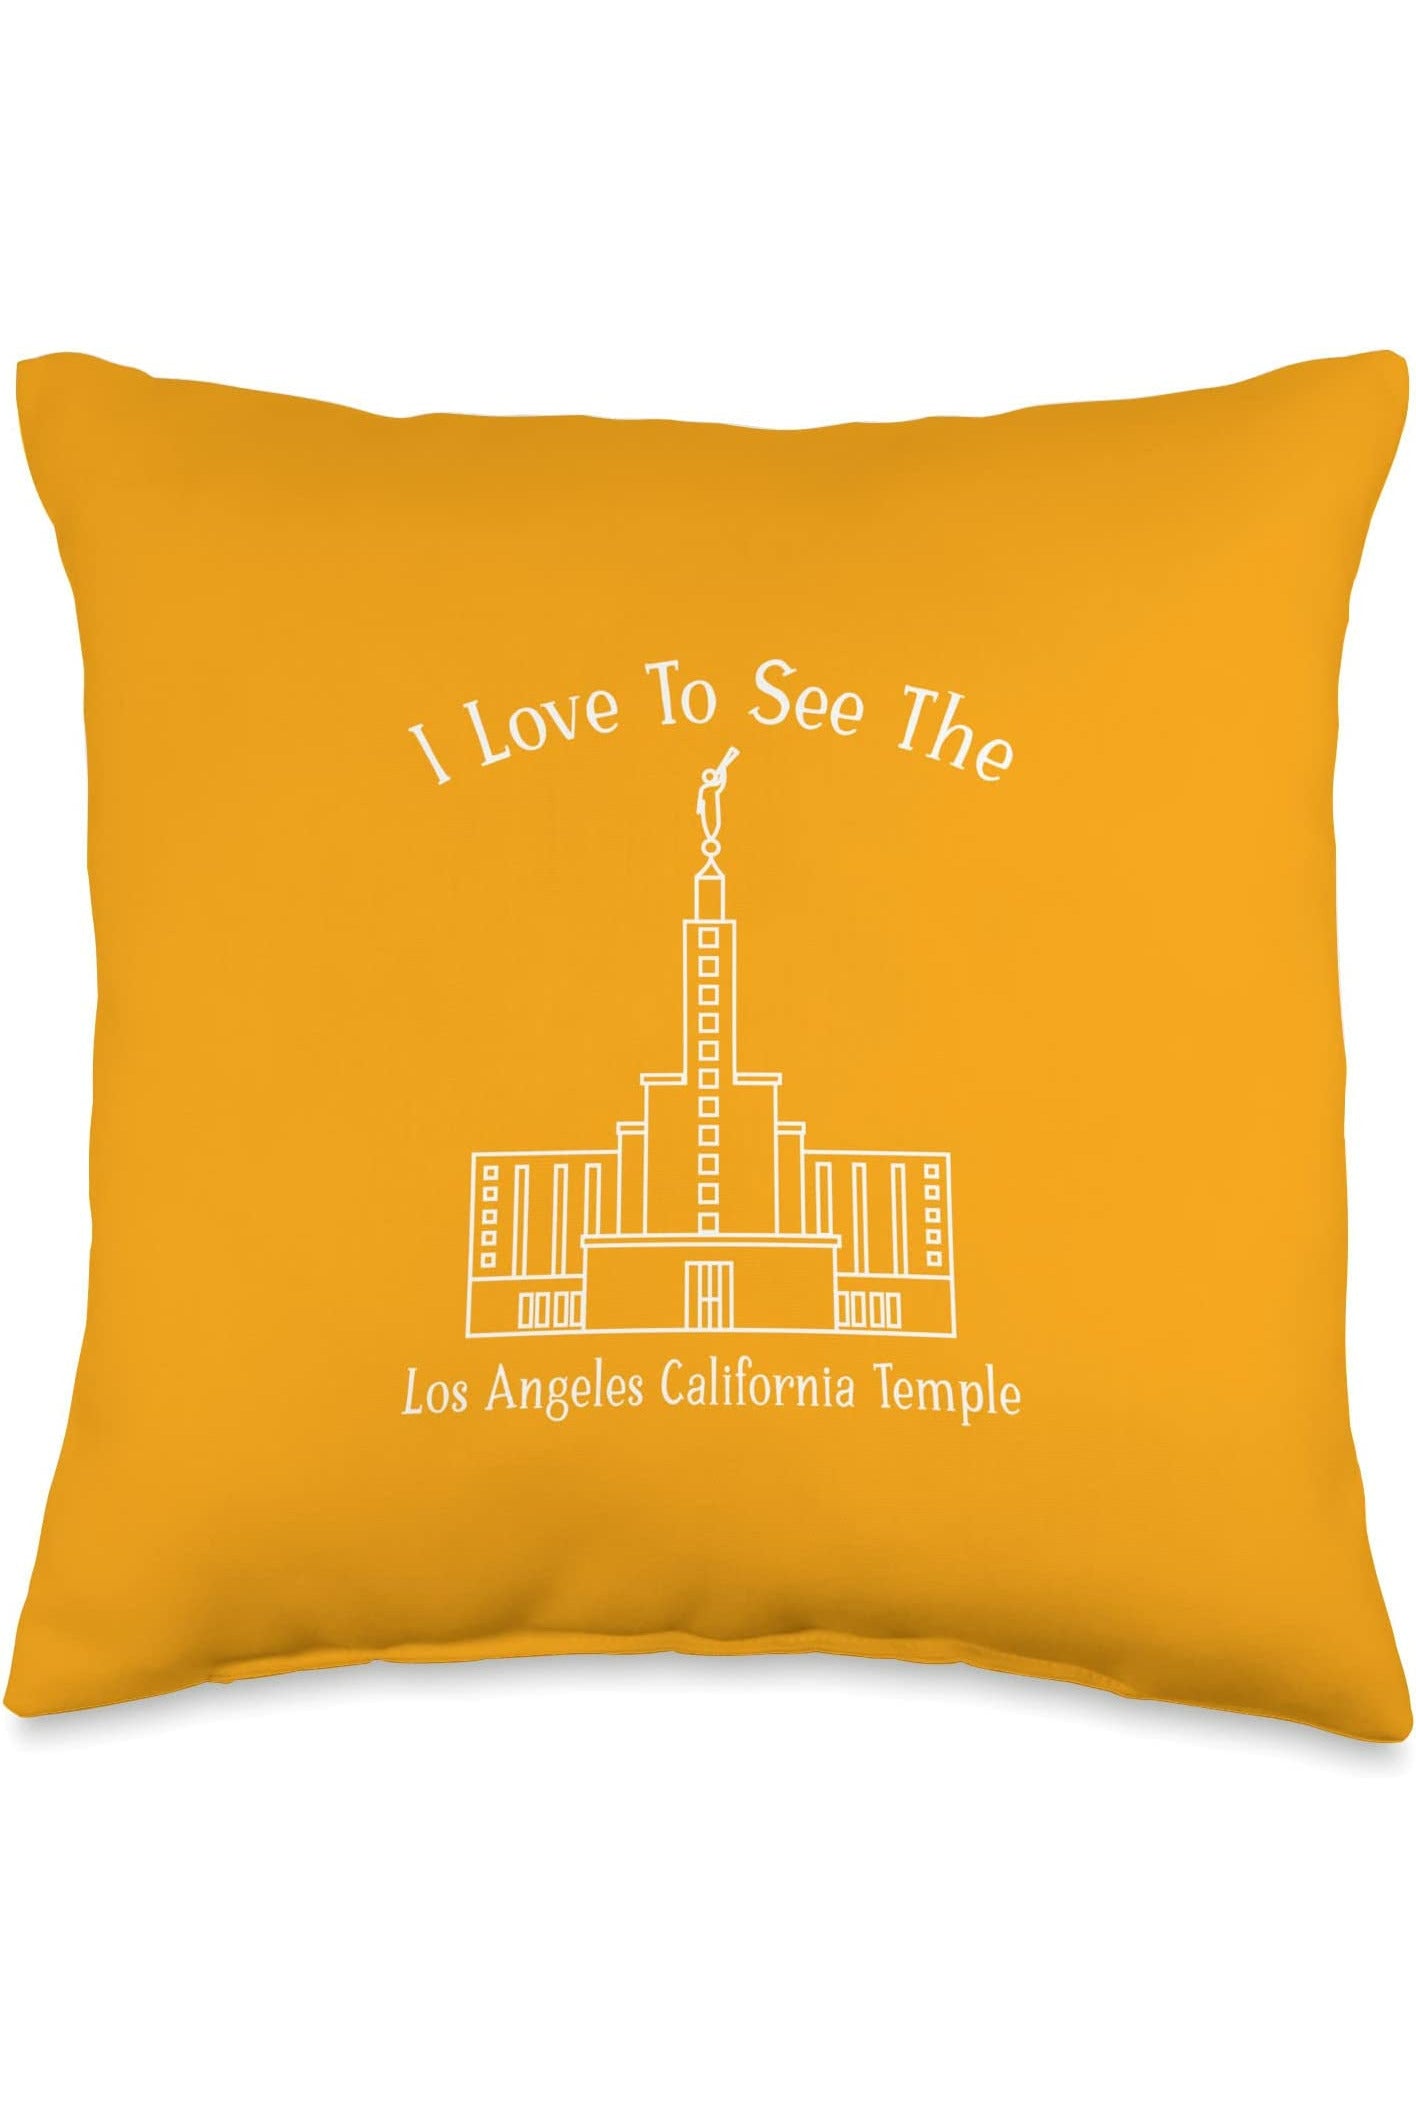 Los Angeles California Temple Throw Pillows - Happy Style (English) US